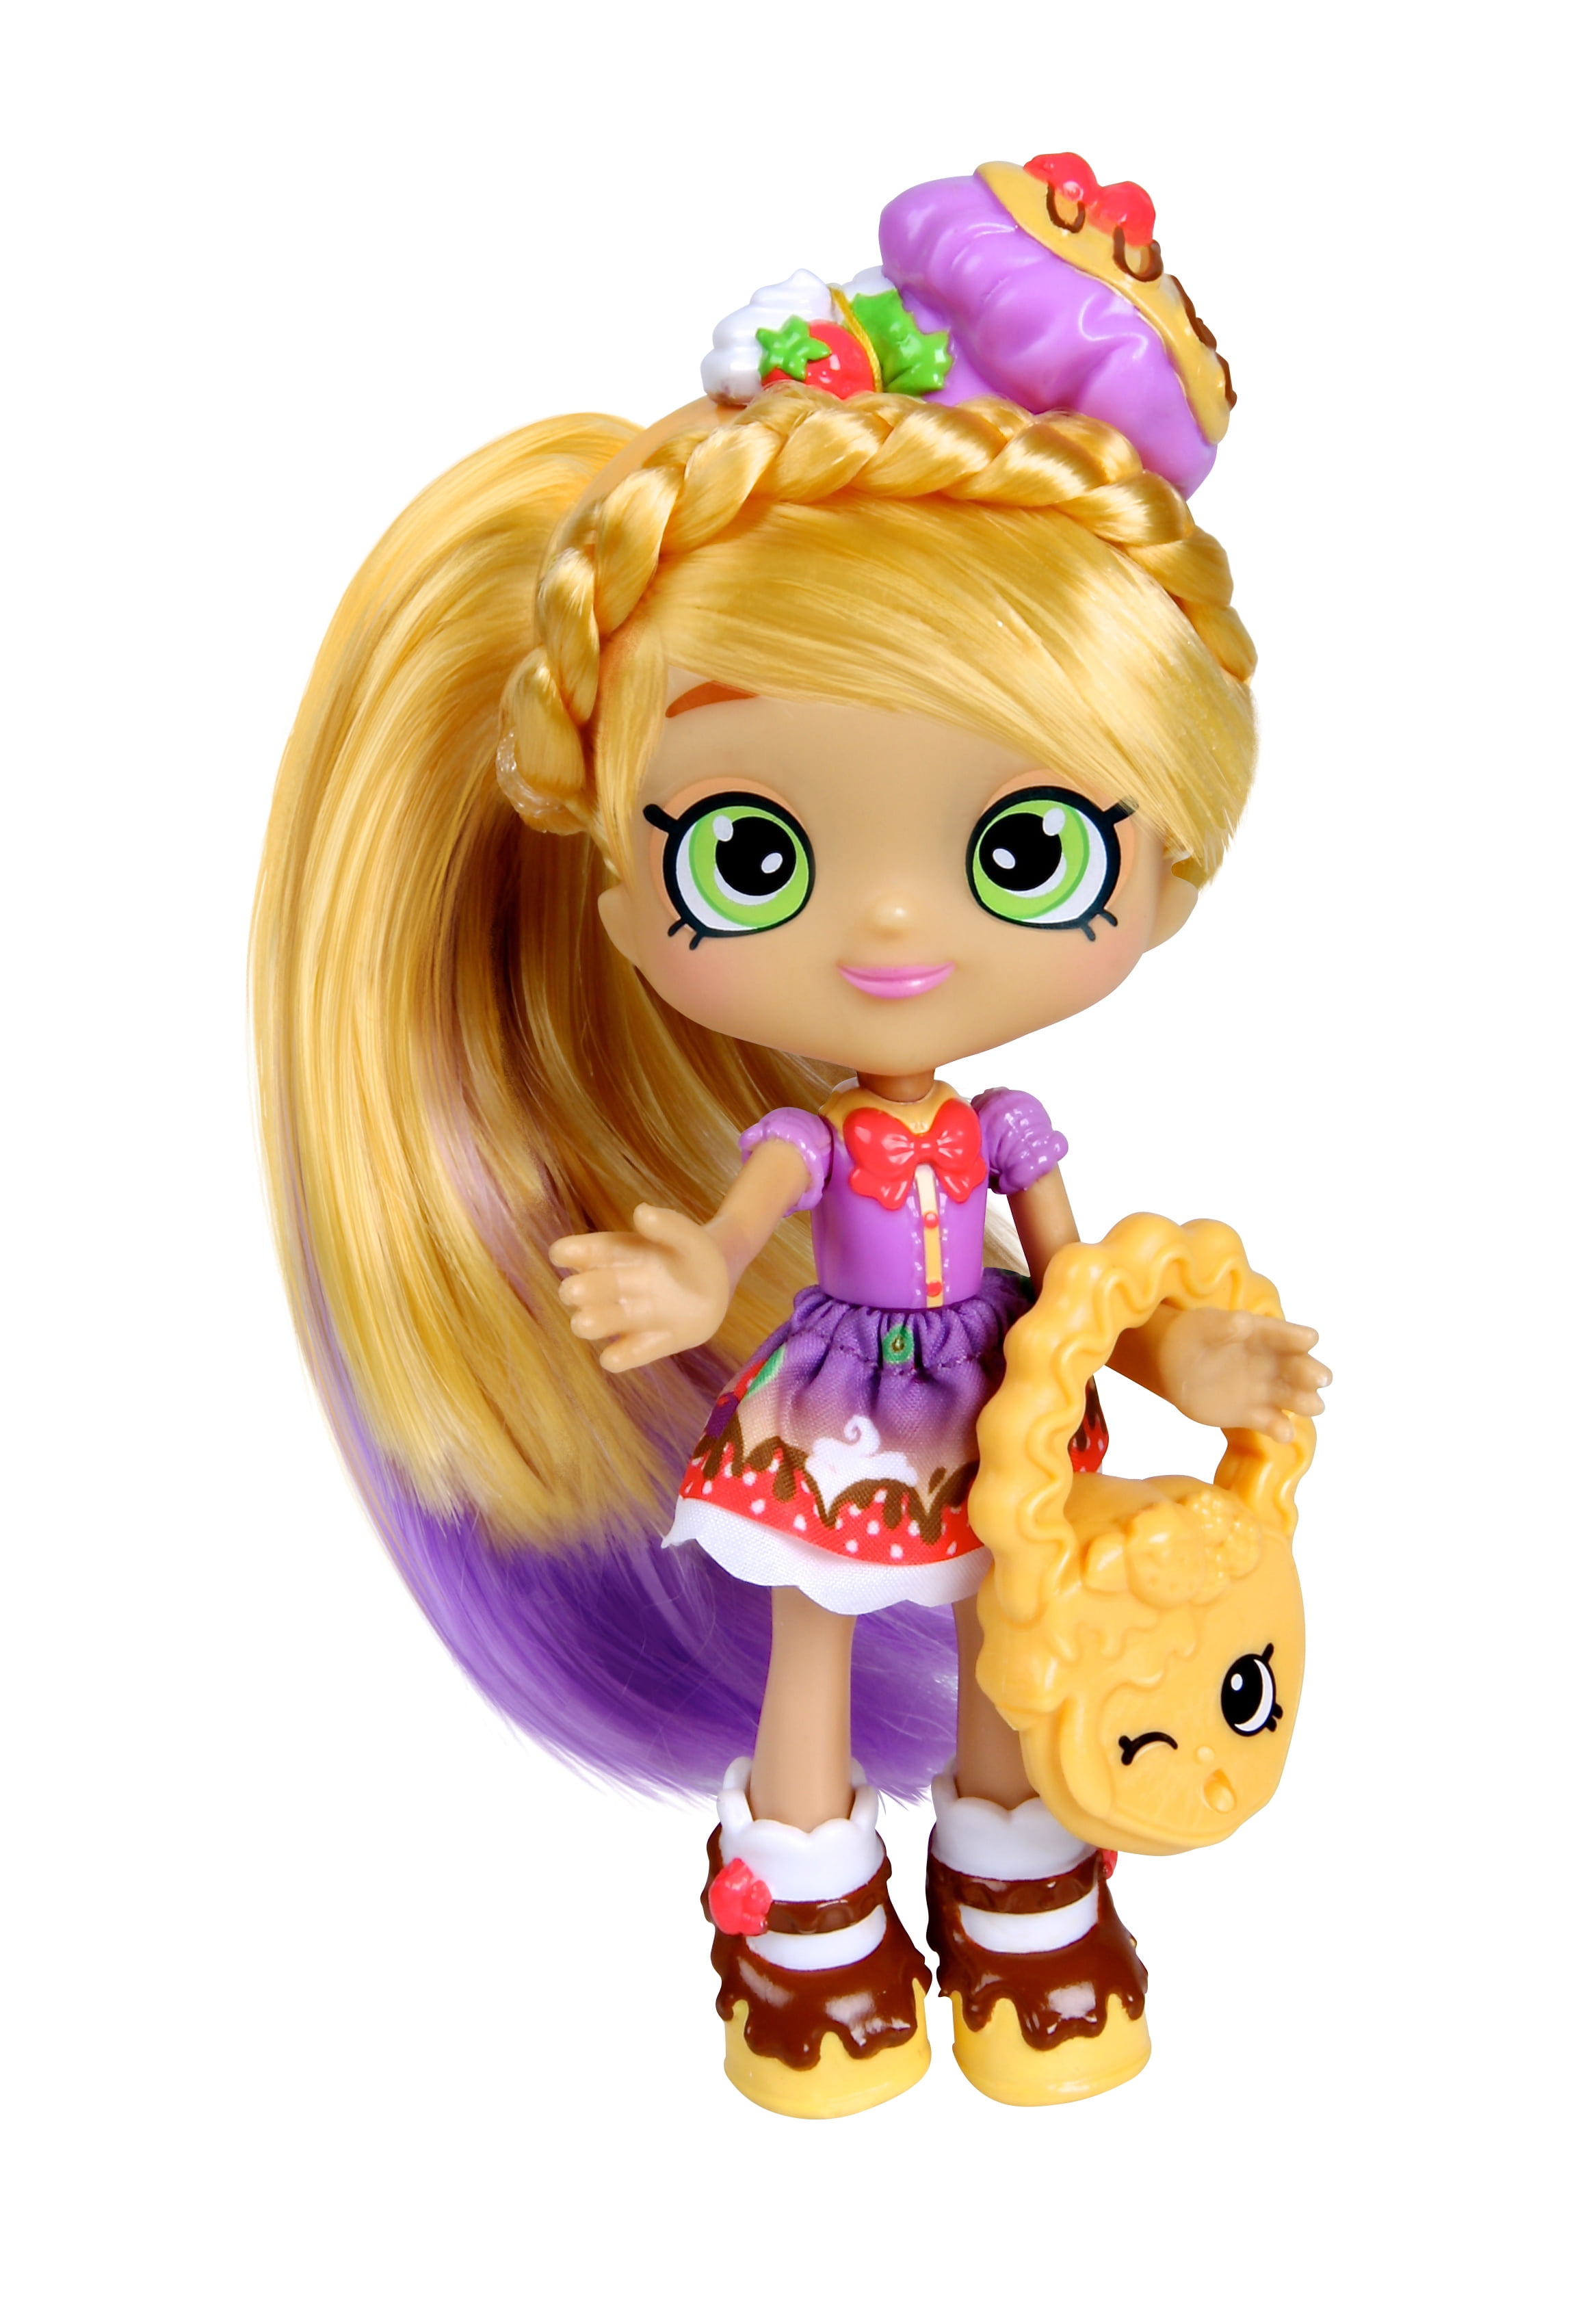 Shopkins Chef Club Shoppies Donatina Doll 630996563014 for sale online 